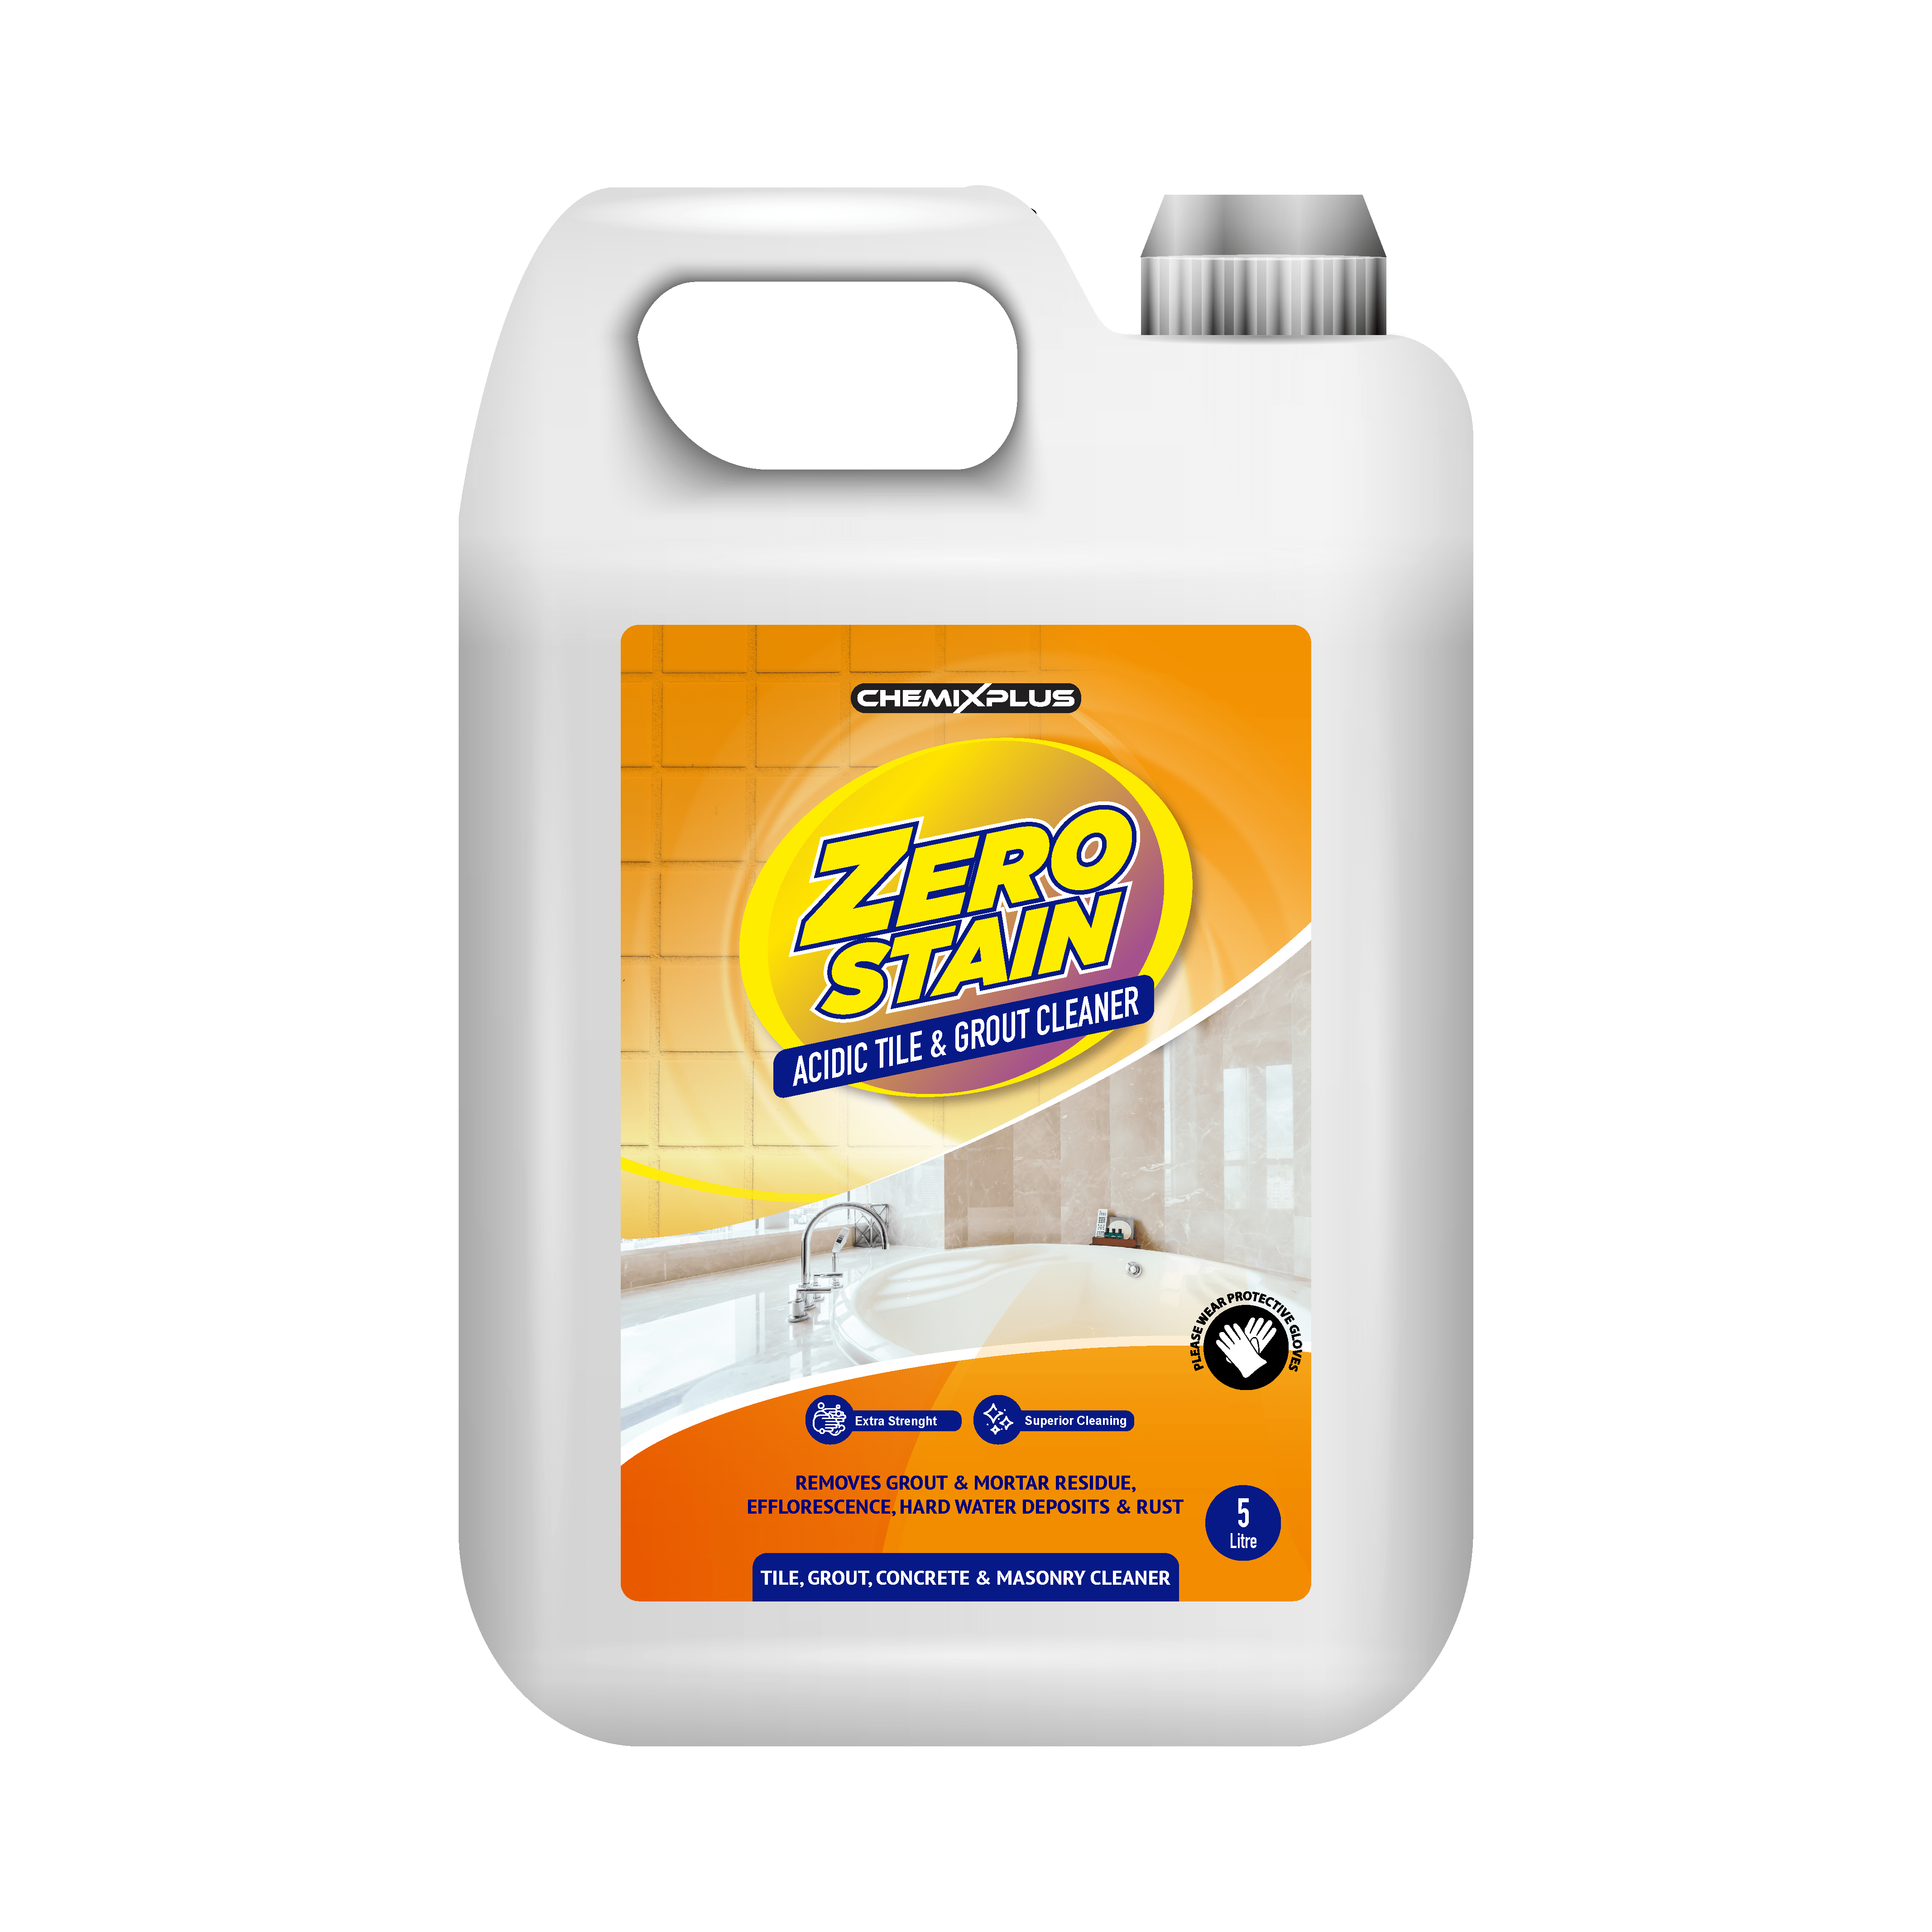 ZERO STAIN - Acidic tile and & grout cleaner 5 Litres